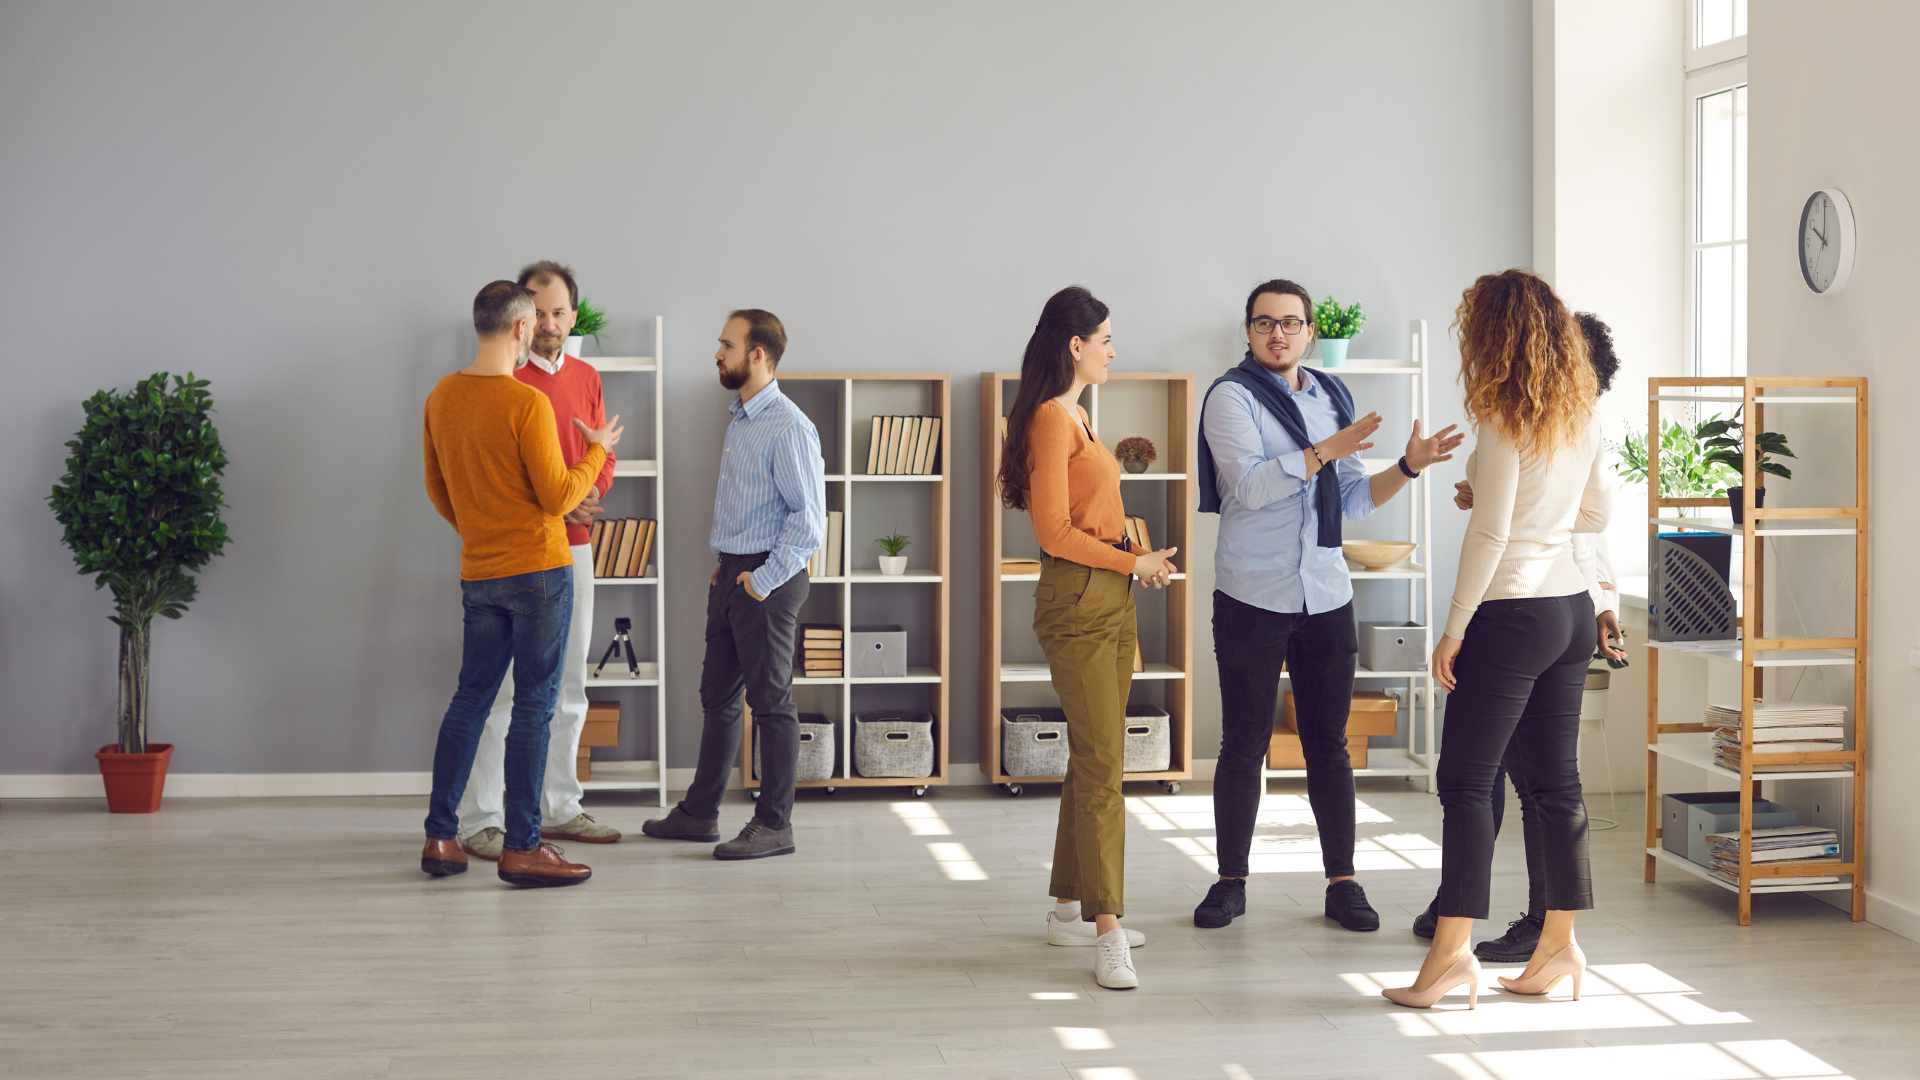 how to improve interpersonal skills people standing and chatting in a room with bookshelves